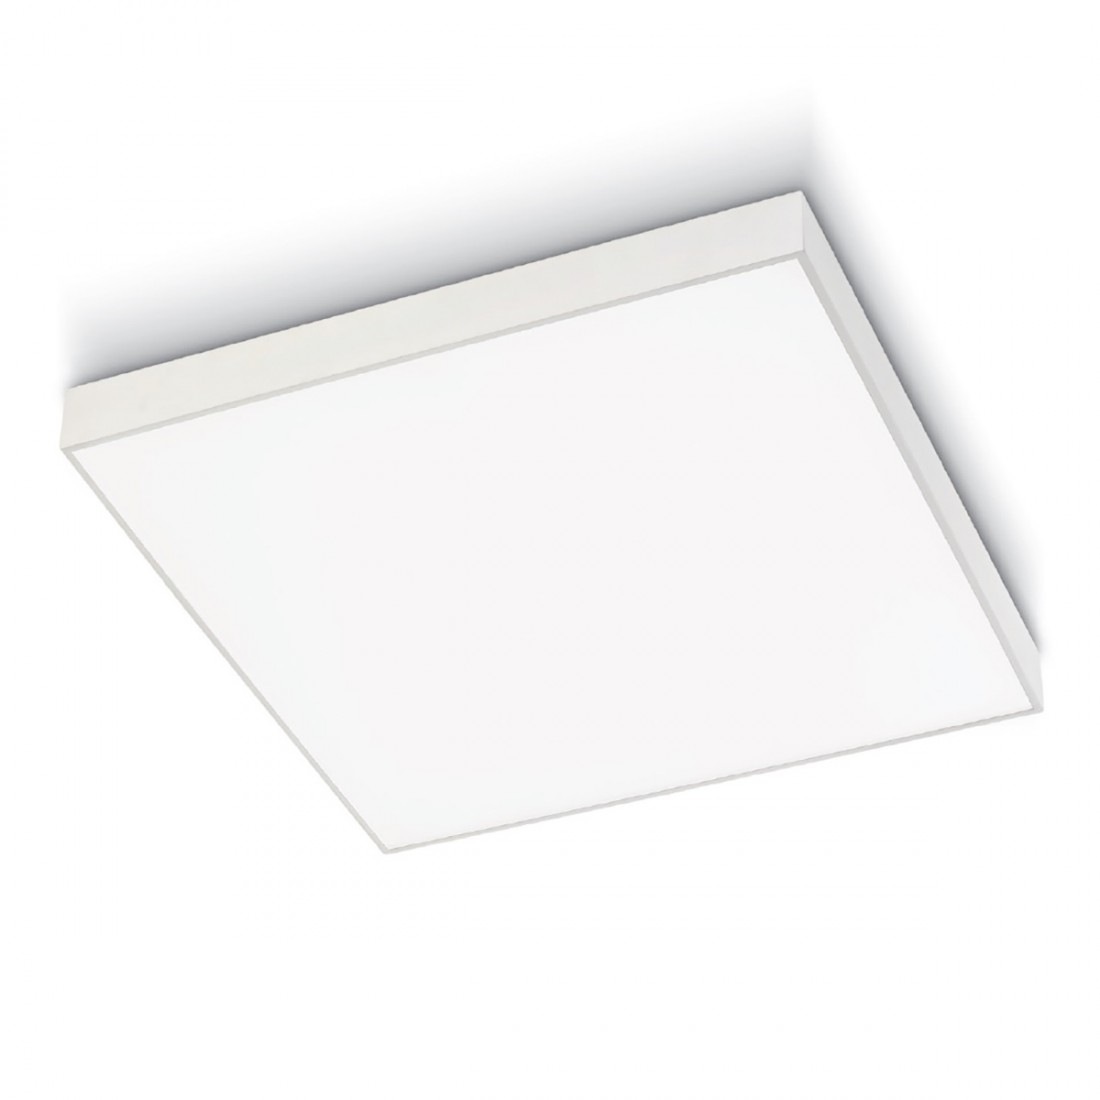 Plafonnier led moderne rectangulaire mounted